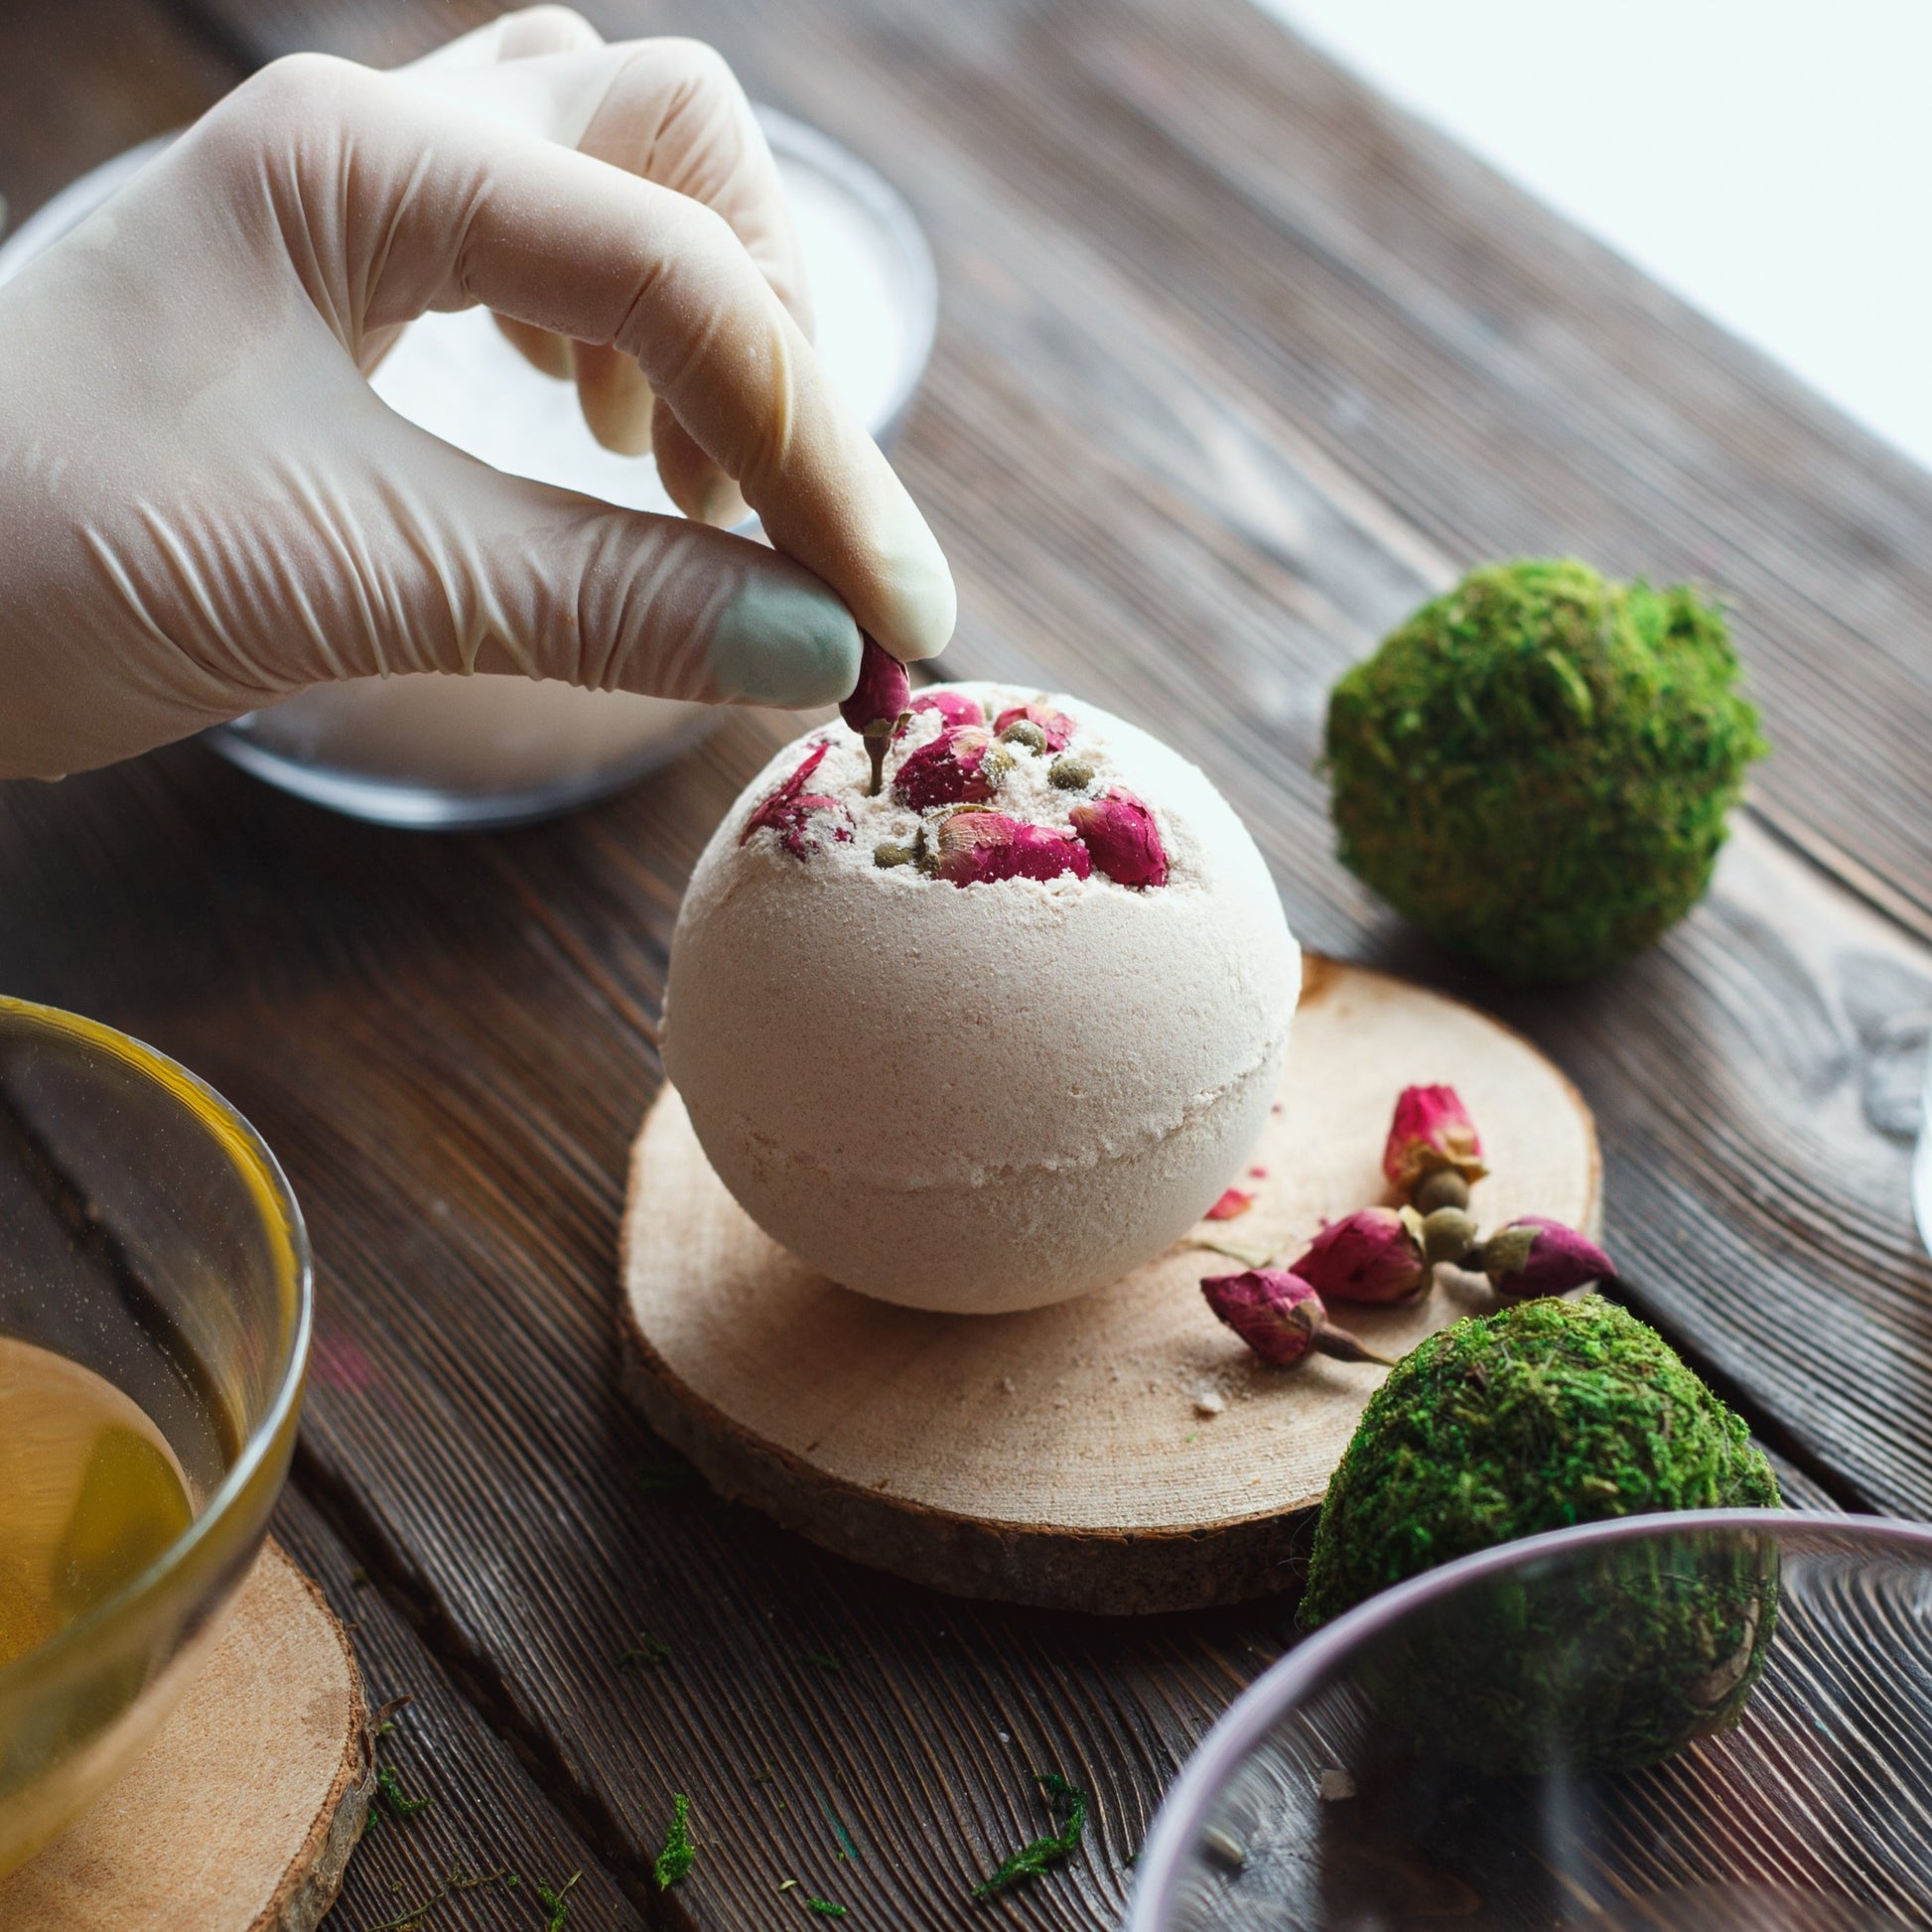 Creating, handmade, DIY, all natural bath bombs with The Eden Collections' Bath Bomb Making Kit.